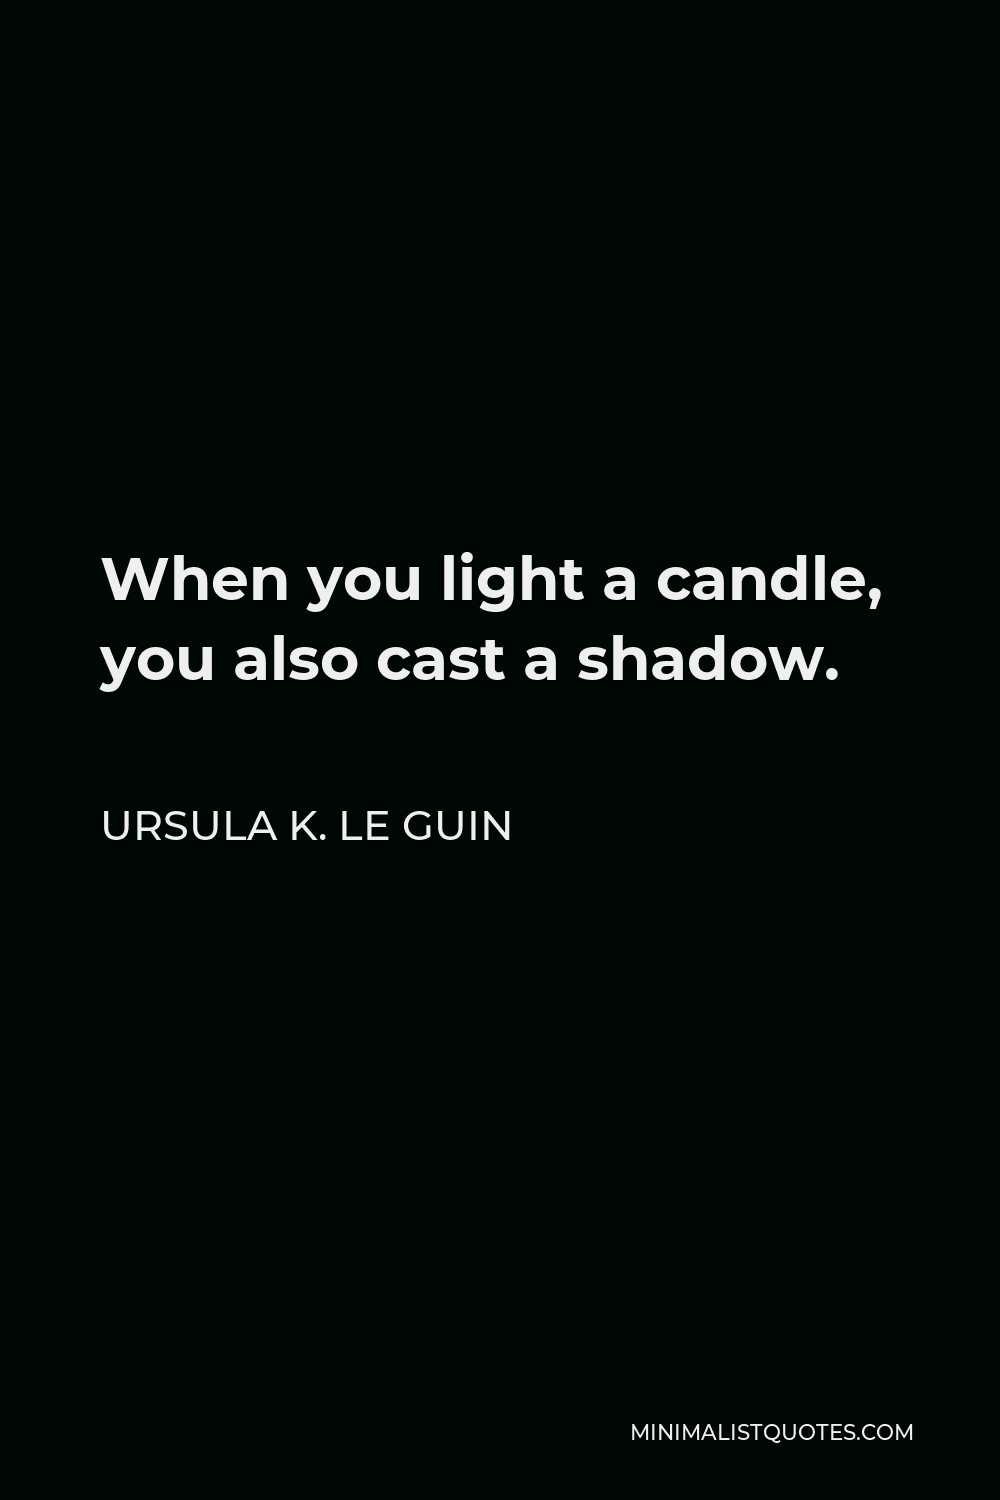 Ursula K. Le Guin Quote - When you light a candle, you also cast a shadow.